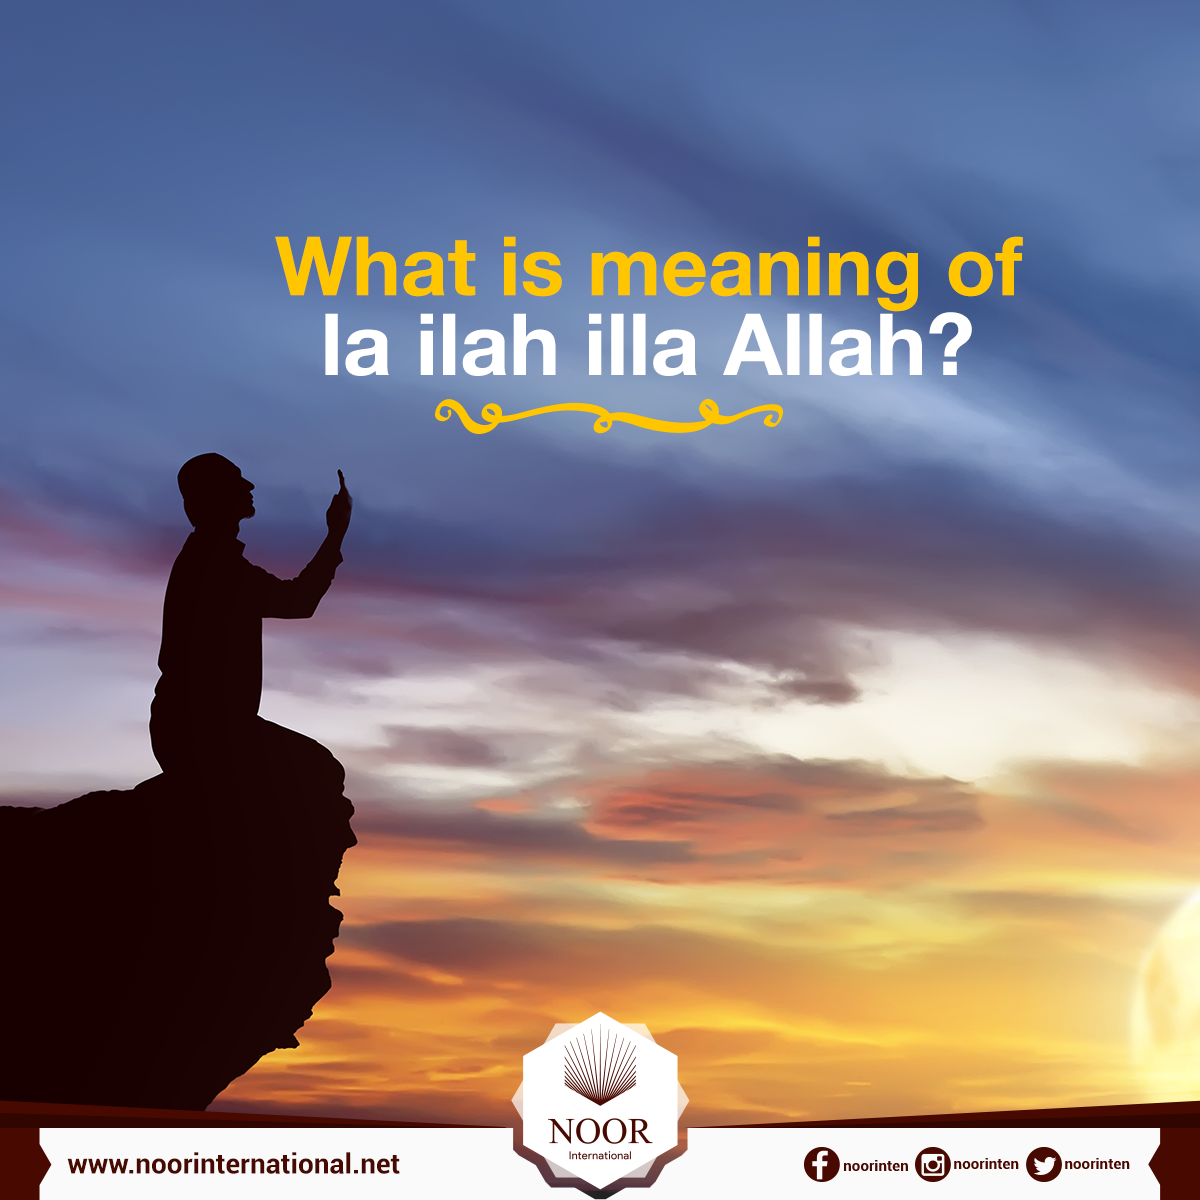 What is meaning of la ilah illa Allah?